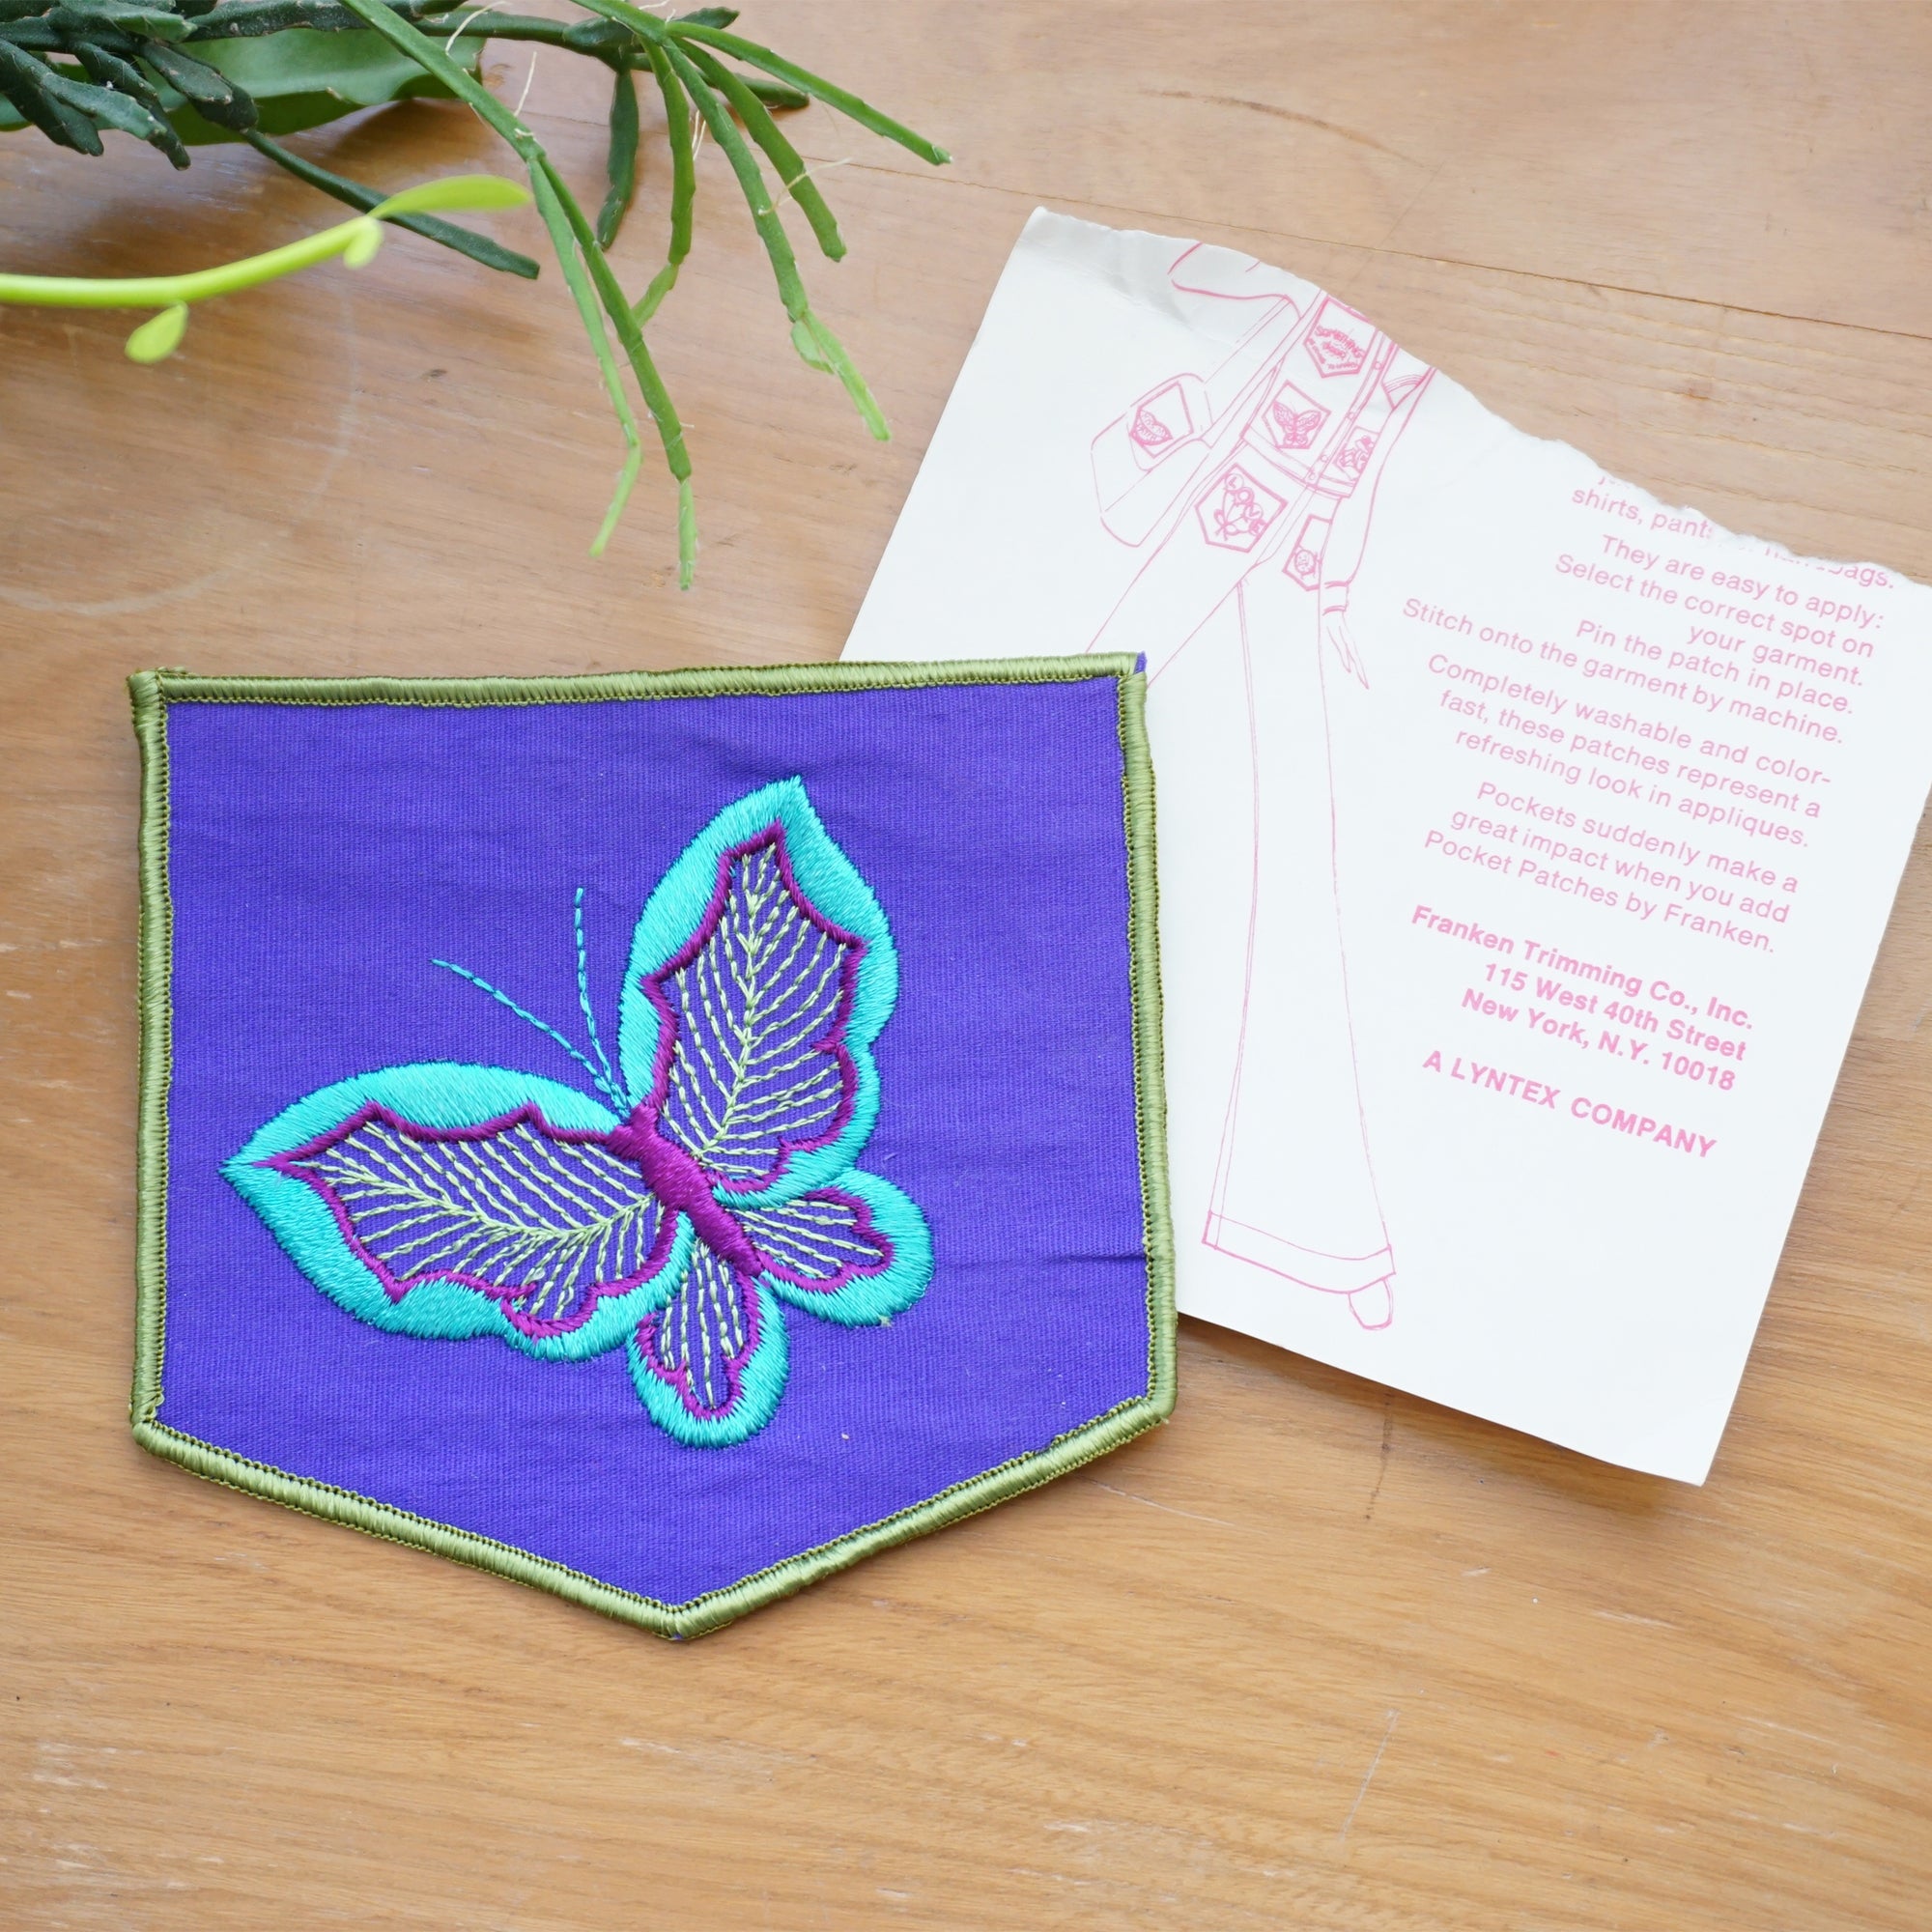 1980s Vintage Pocket Shaped Jewel Toned Embroidered Clothing Patch with Butterfly